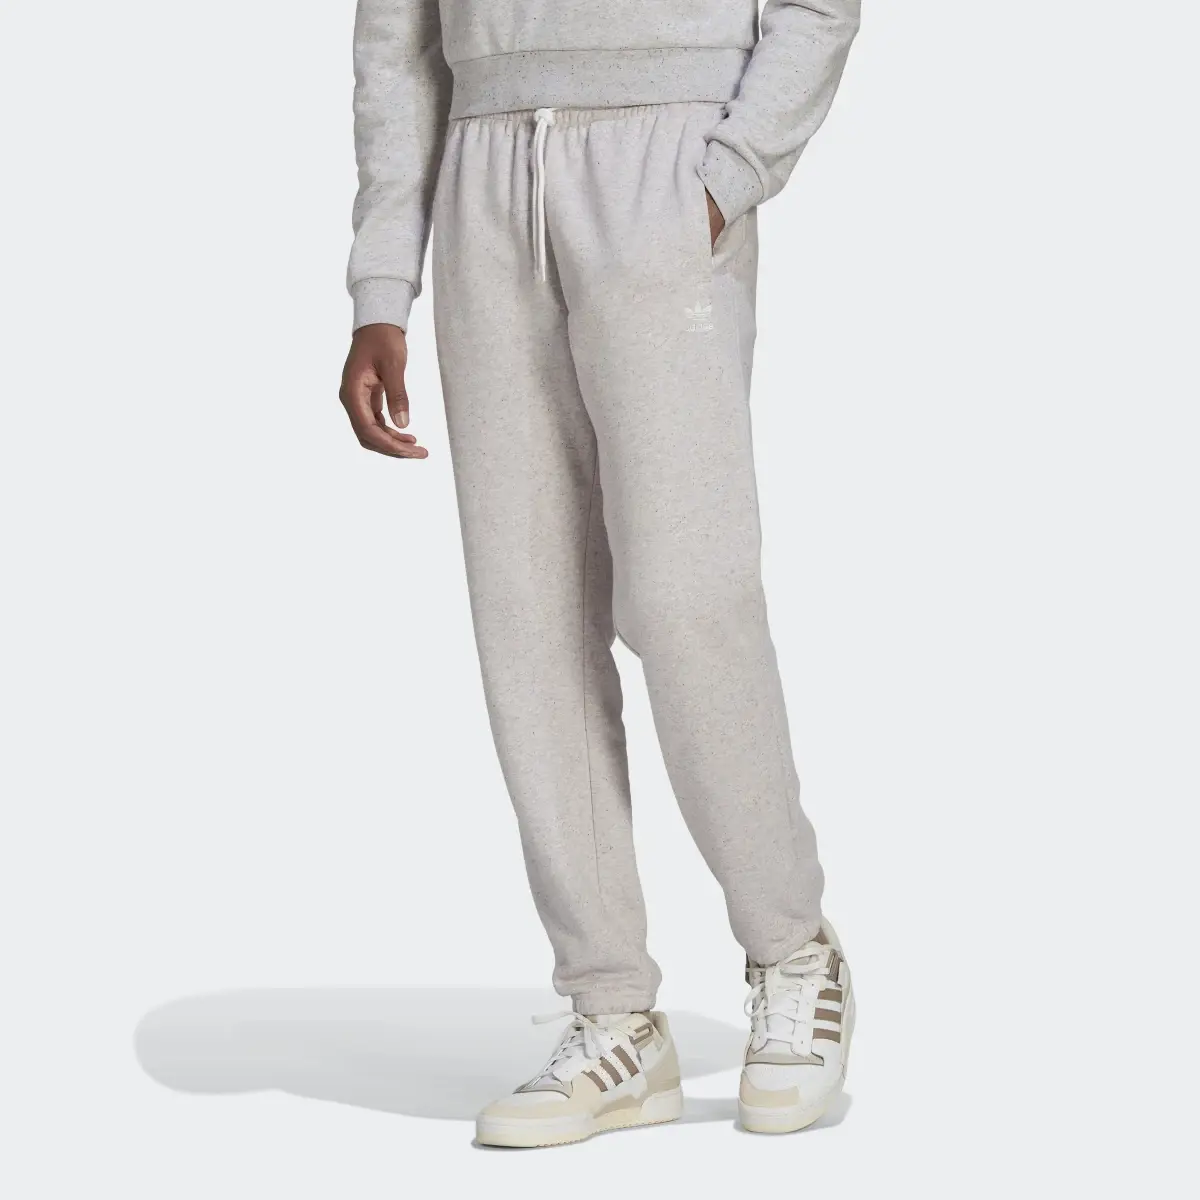 Adidas Essentials+ Made with Nature Sweat Pants. 1